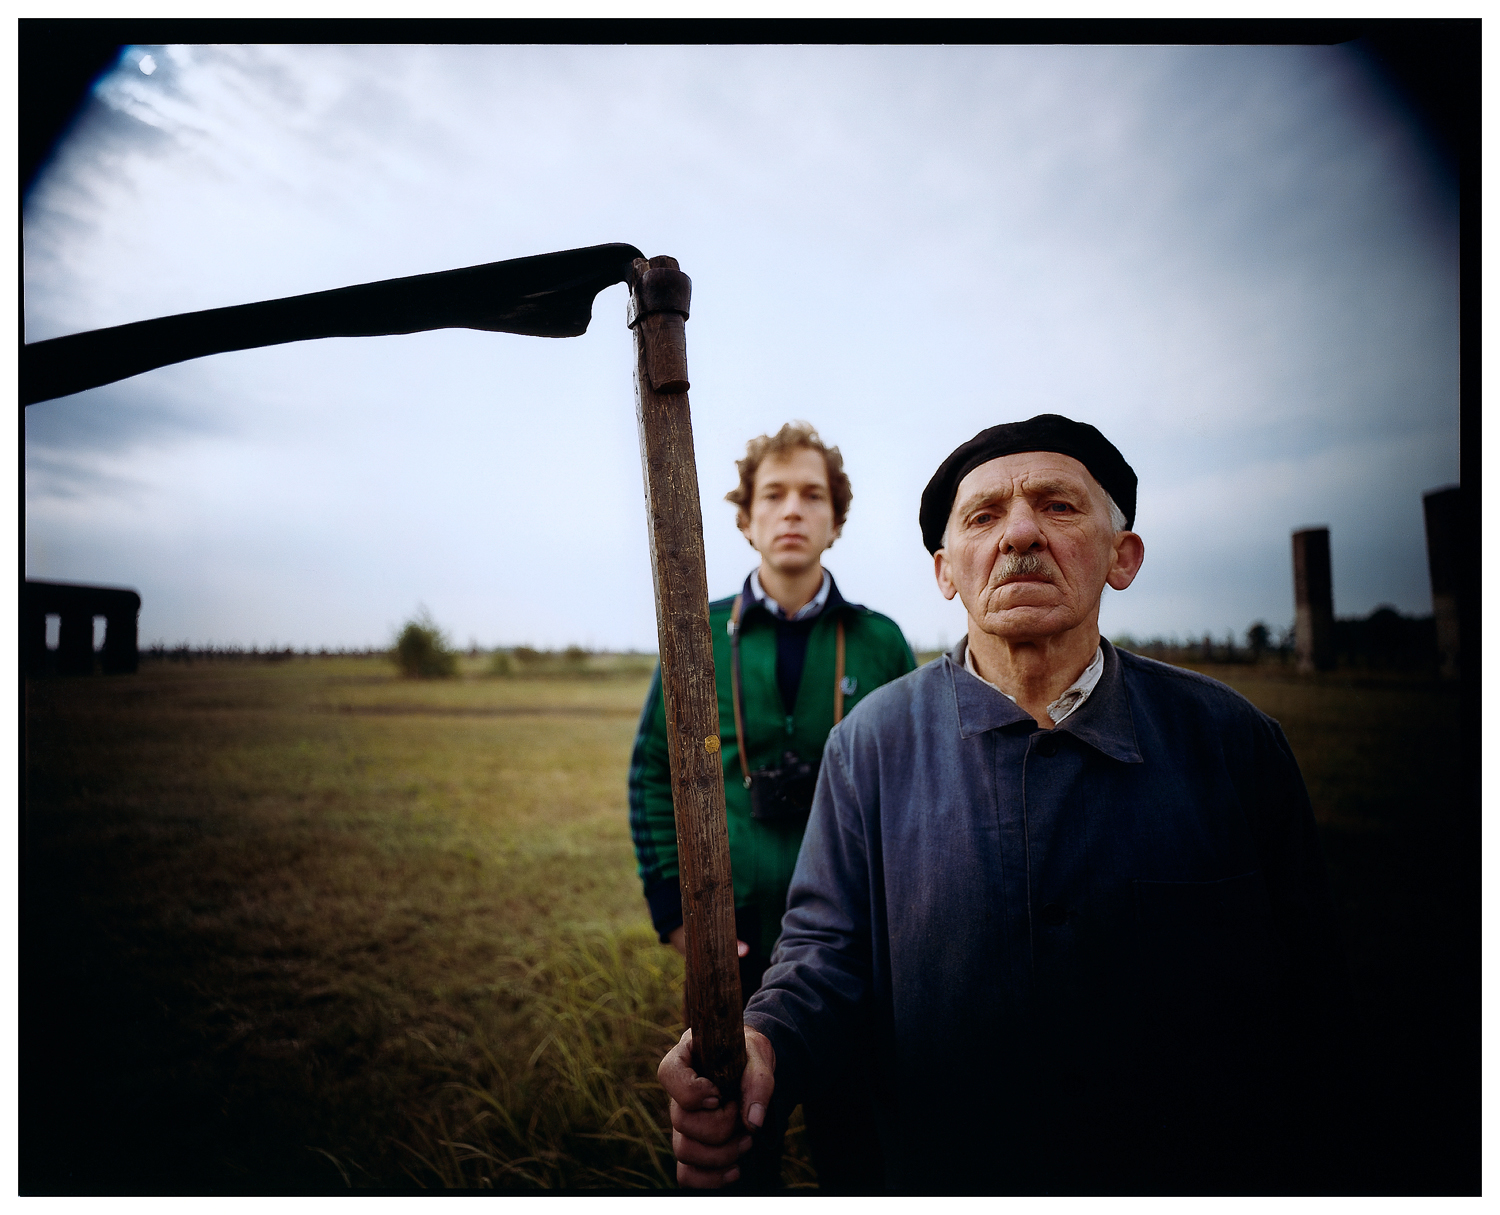 James Friedman, Local resident with scythe and self-portrait, Auschwitz II (Birkenau) concentration camp, Oswiecim, Poland, 1983. Photograph, 16 x 20 inches. Courtesy of the artist